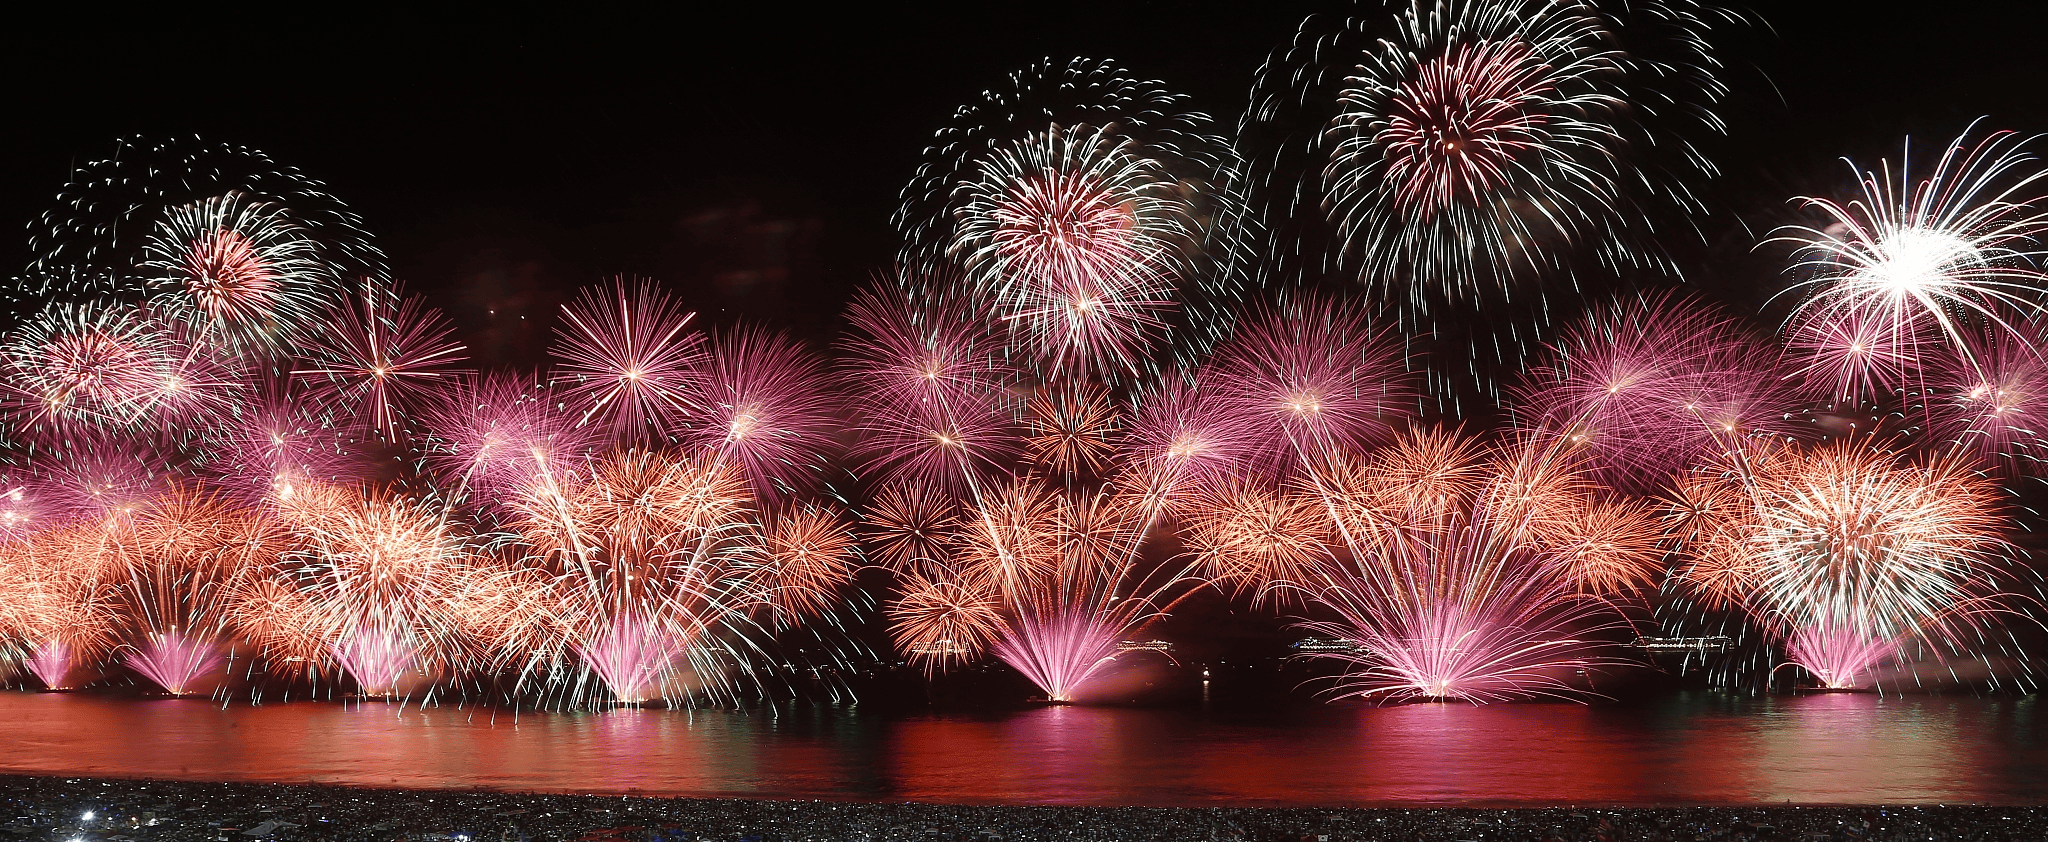 Spectacular firework display lighting up the night sky with pink, orange blue and silver